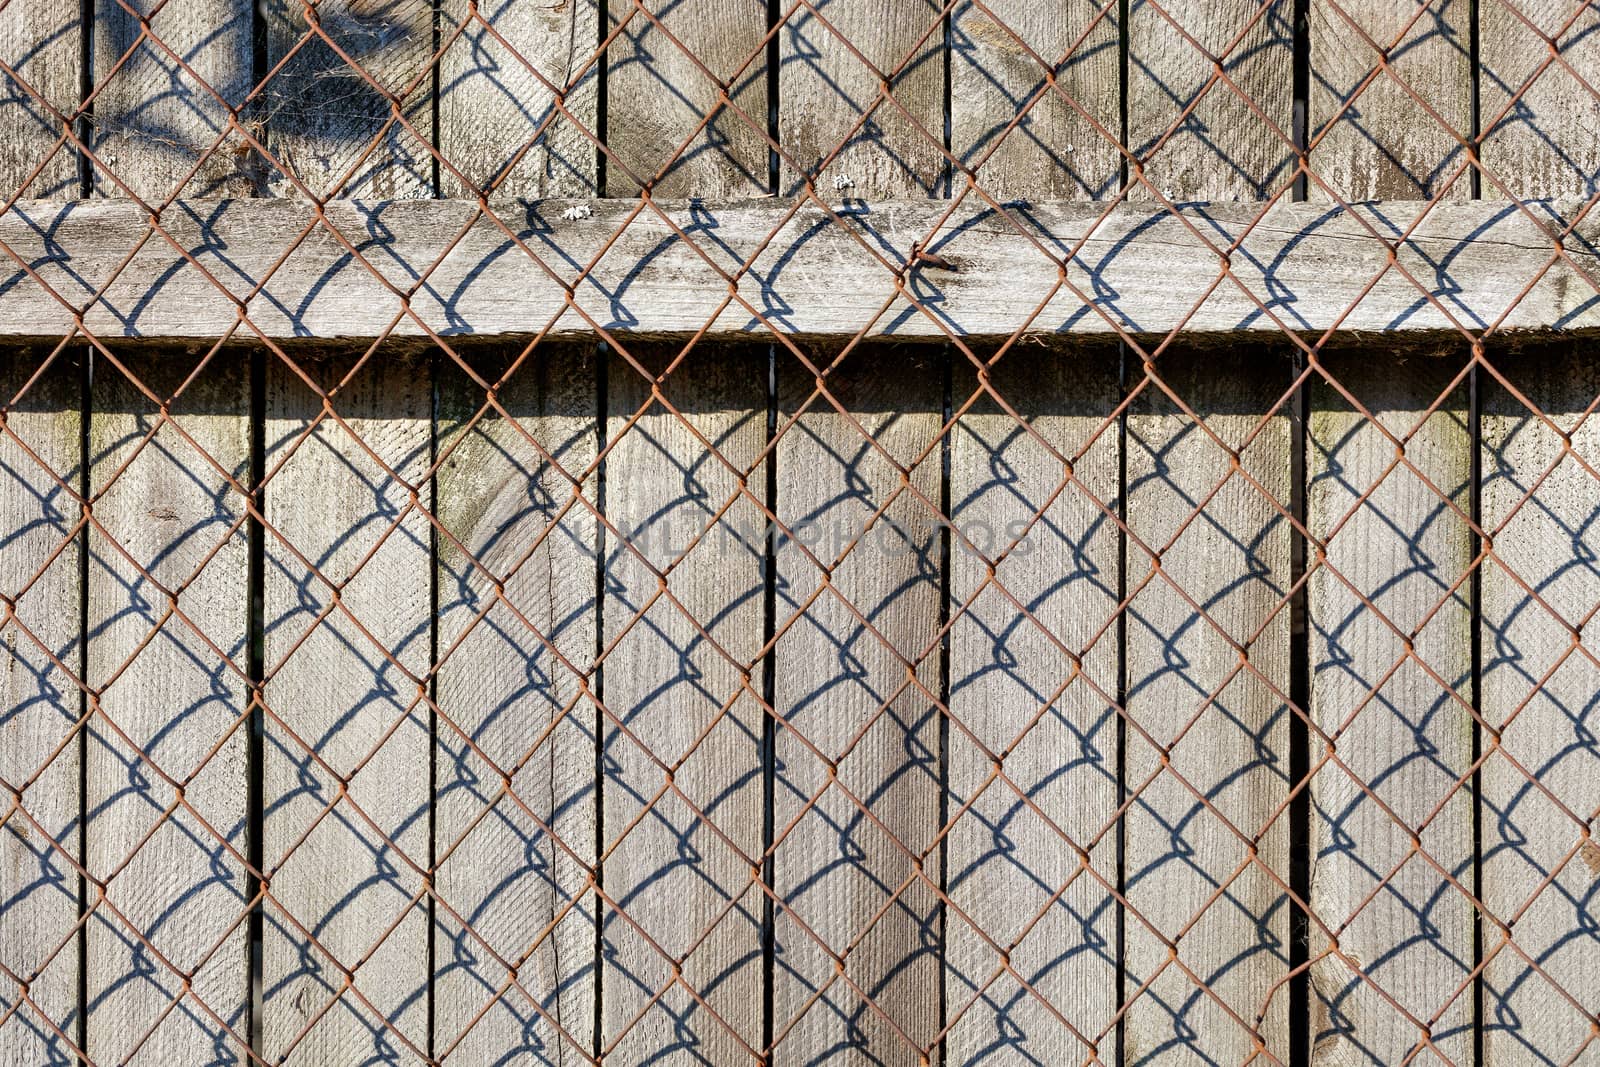 A weathered old gray wooden fence with a horizontal bar nailed by rusty nails stands behind a rusty metal mesh.